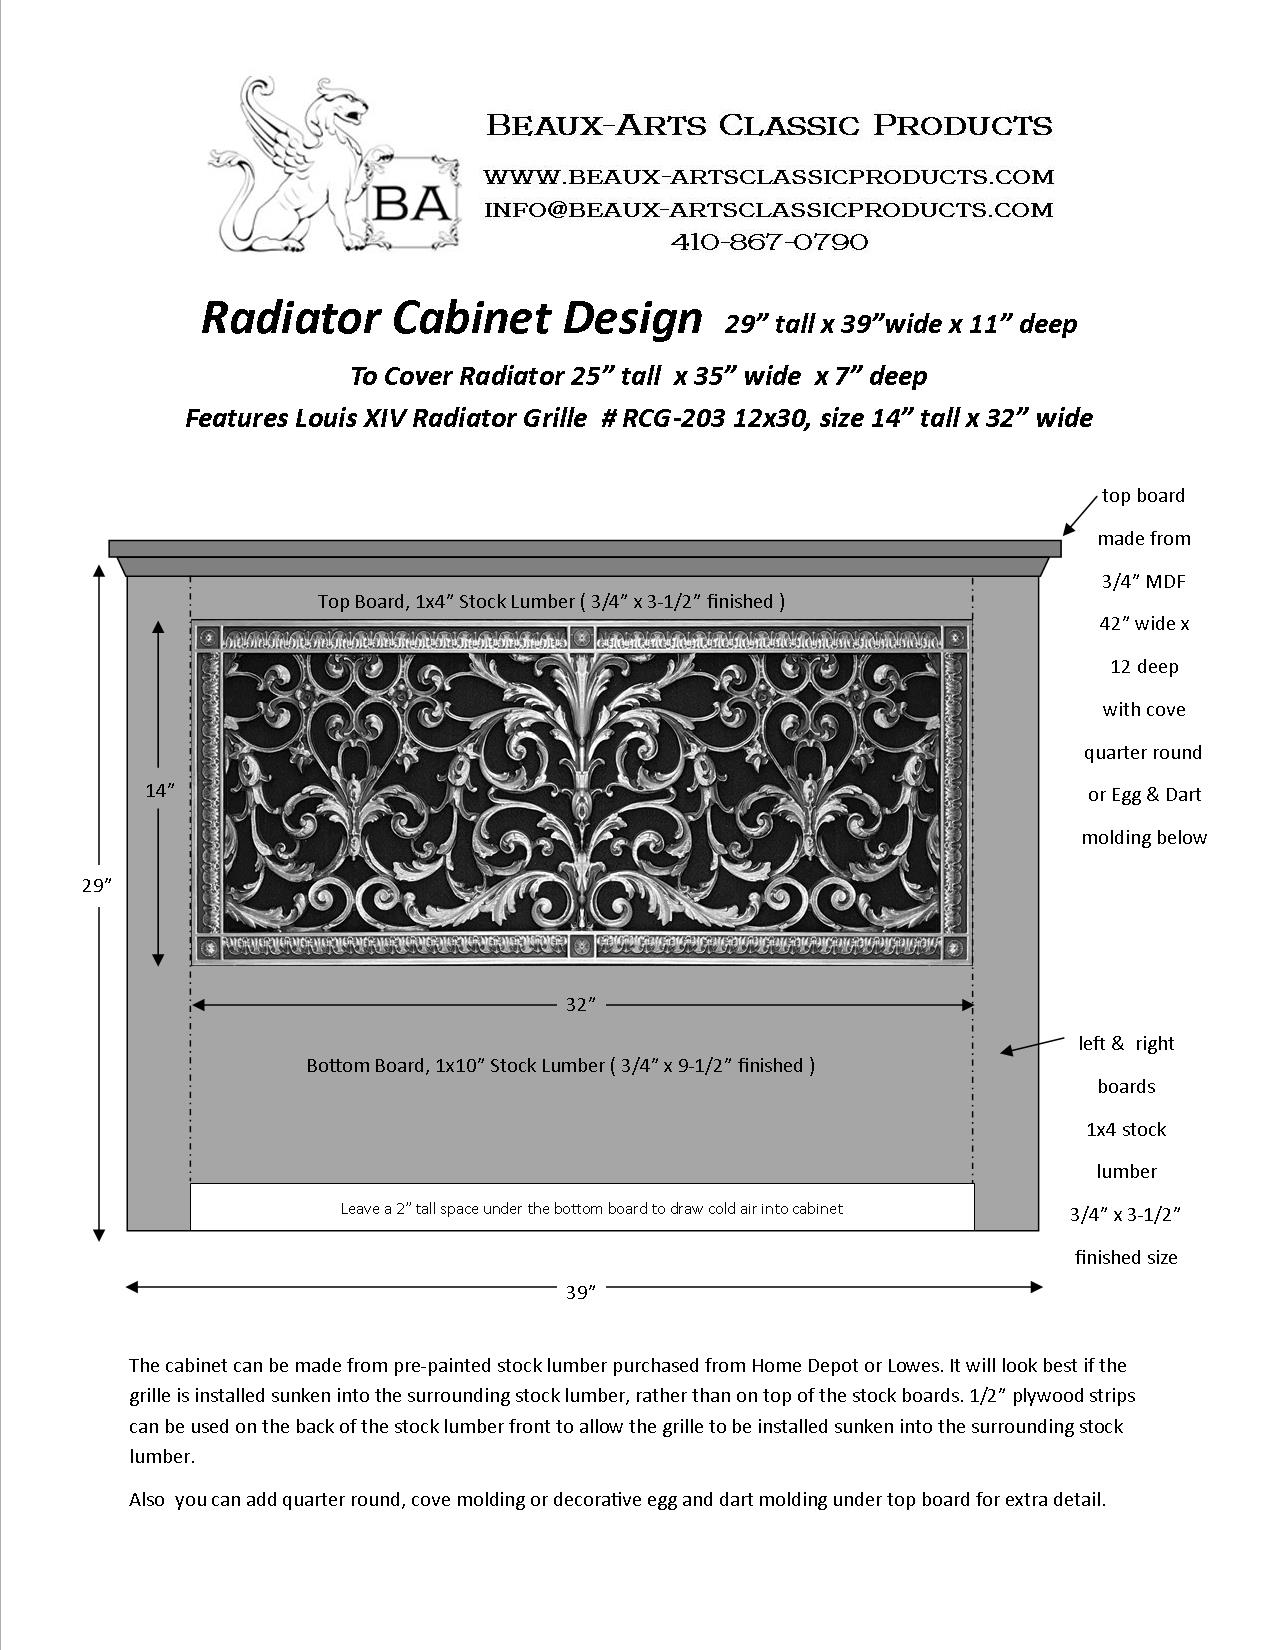 Radiator Cover Design with a 12" x 30" decorative radiator cover grille